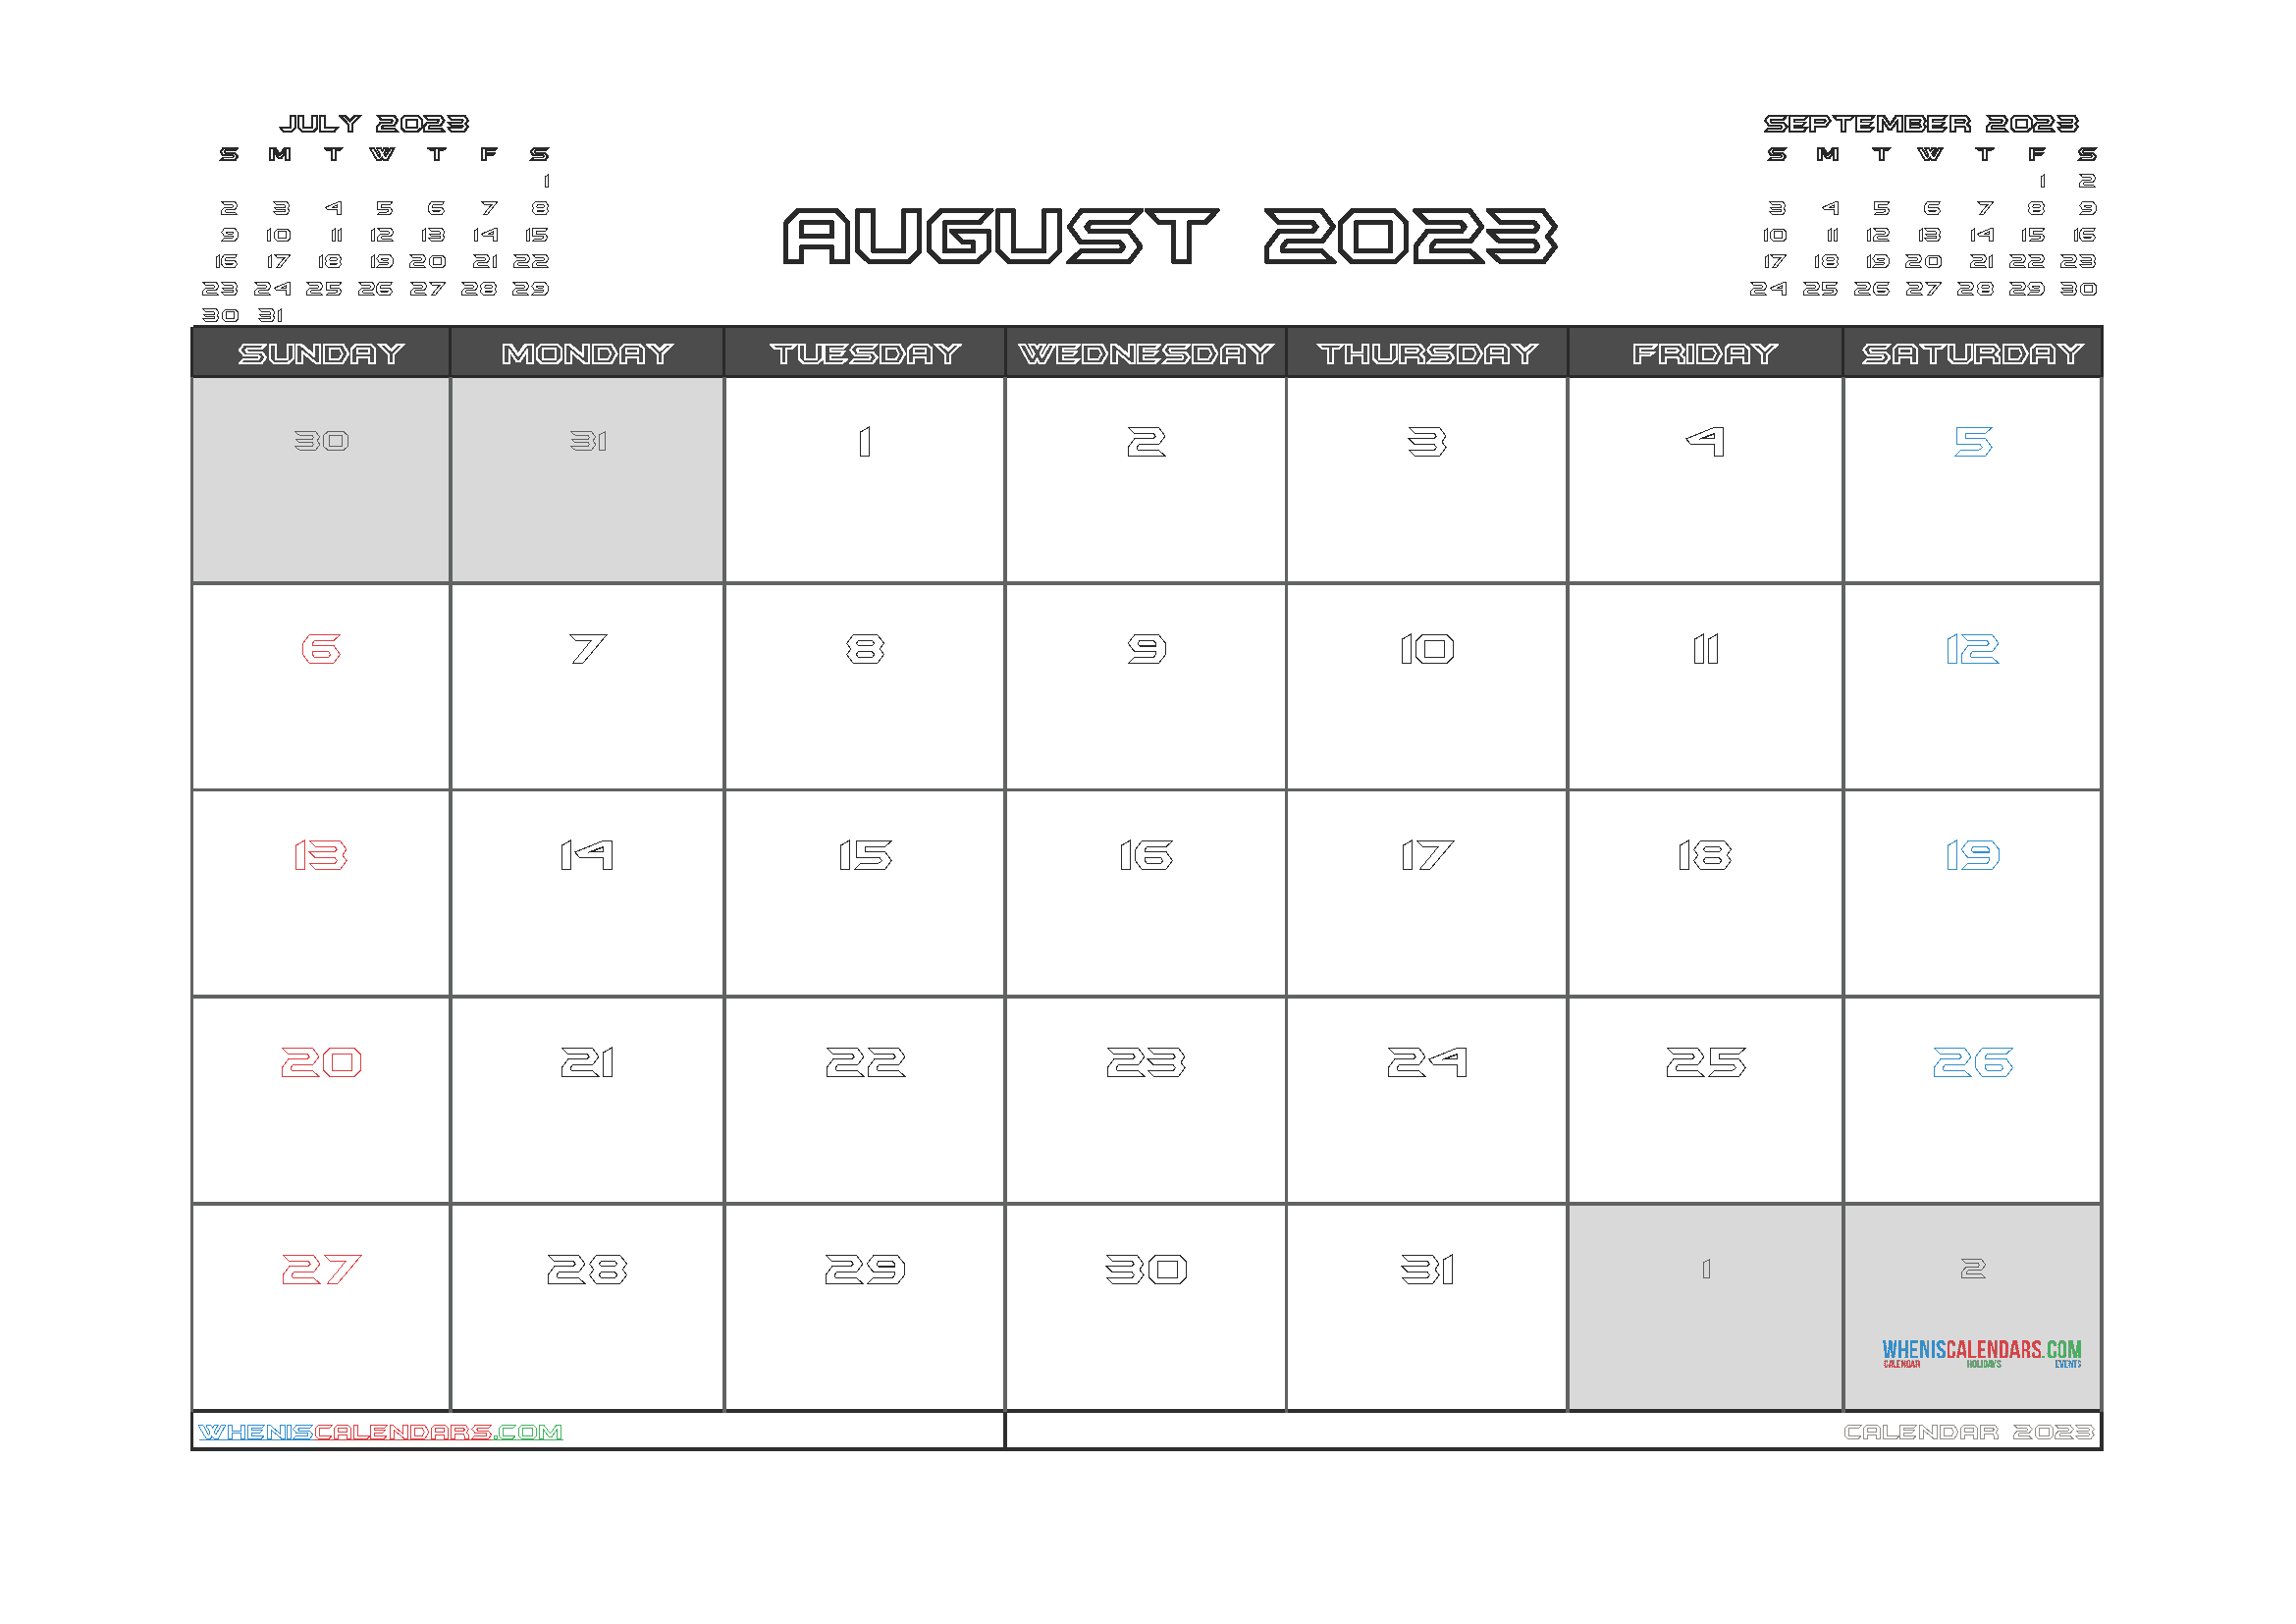 Free August 2023 Calendar with Holidays Printable PDF in Landscape